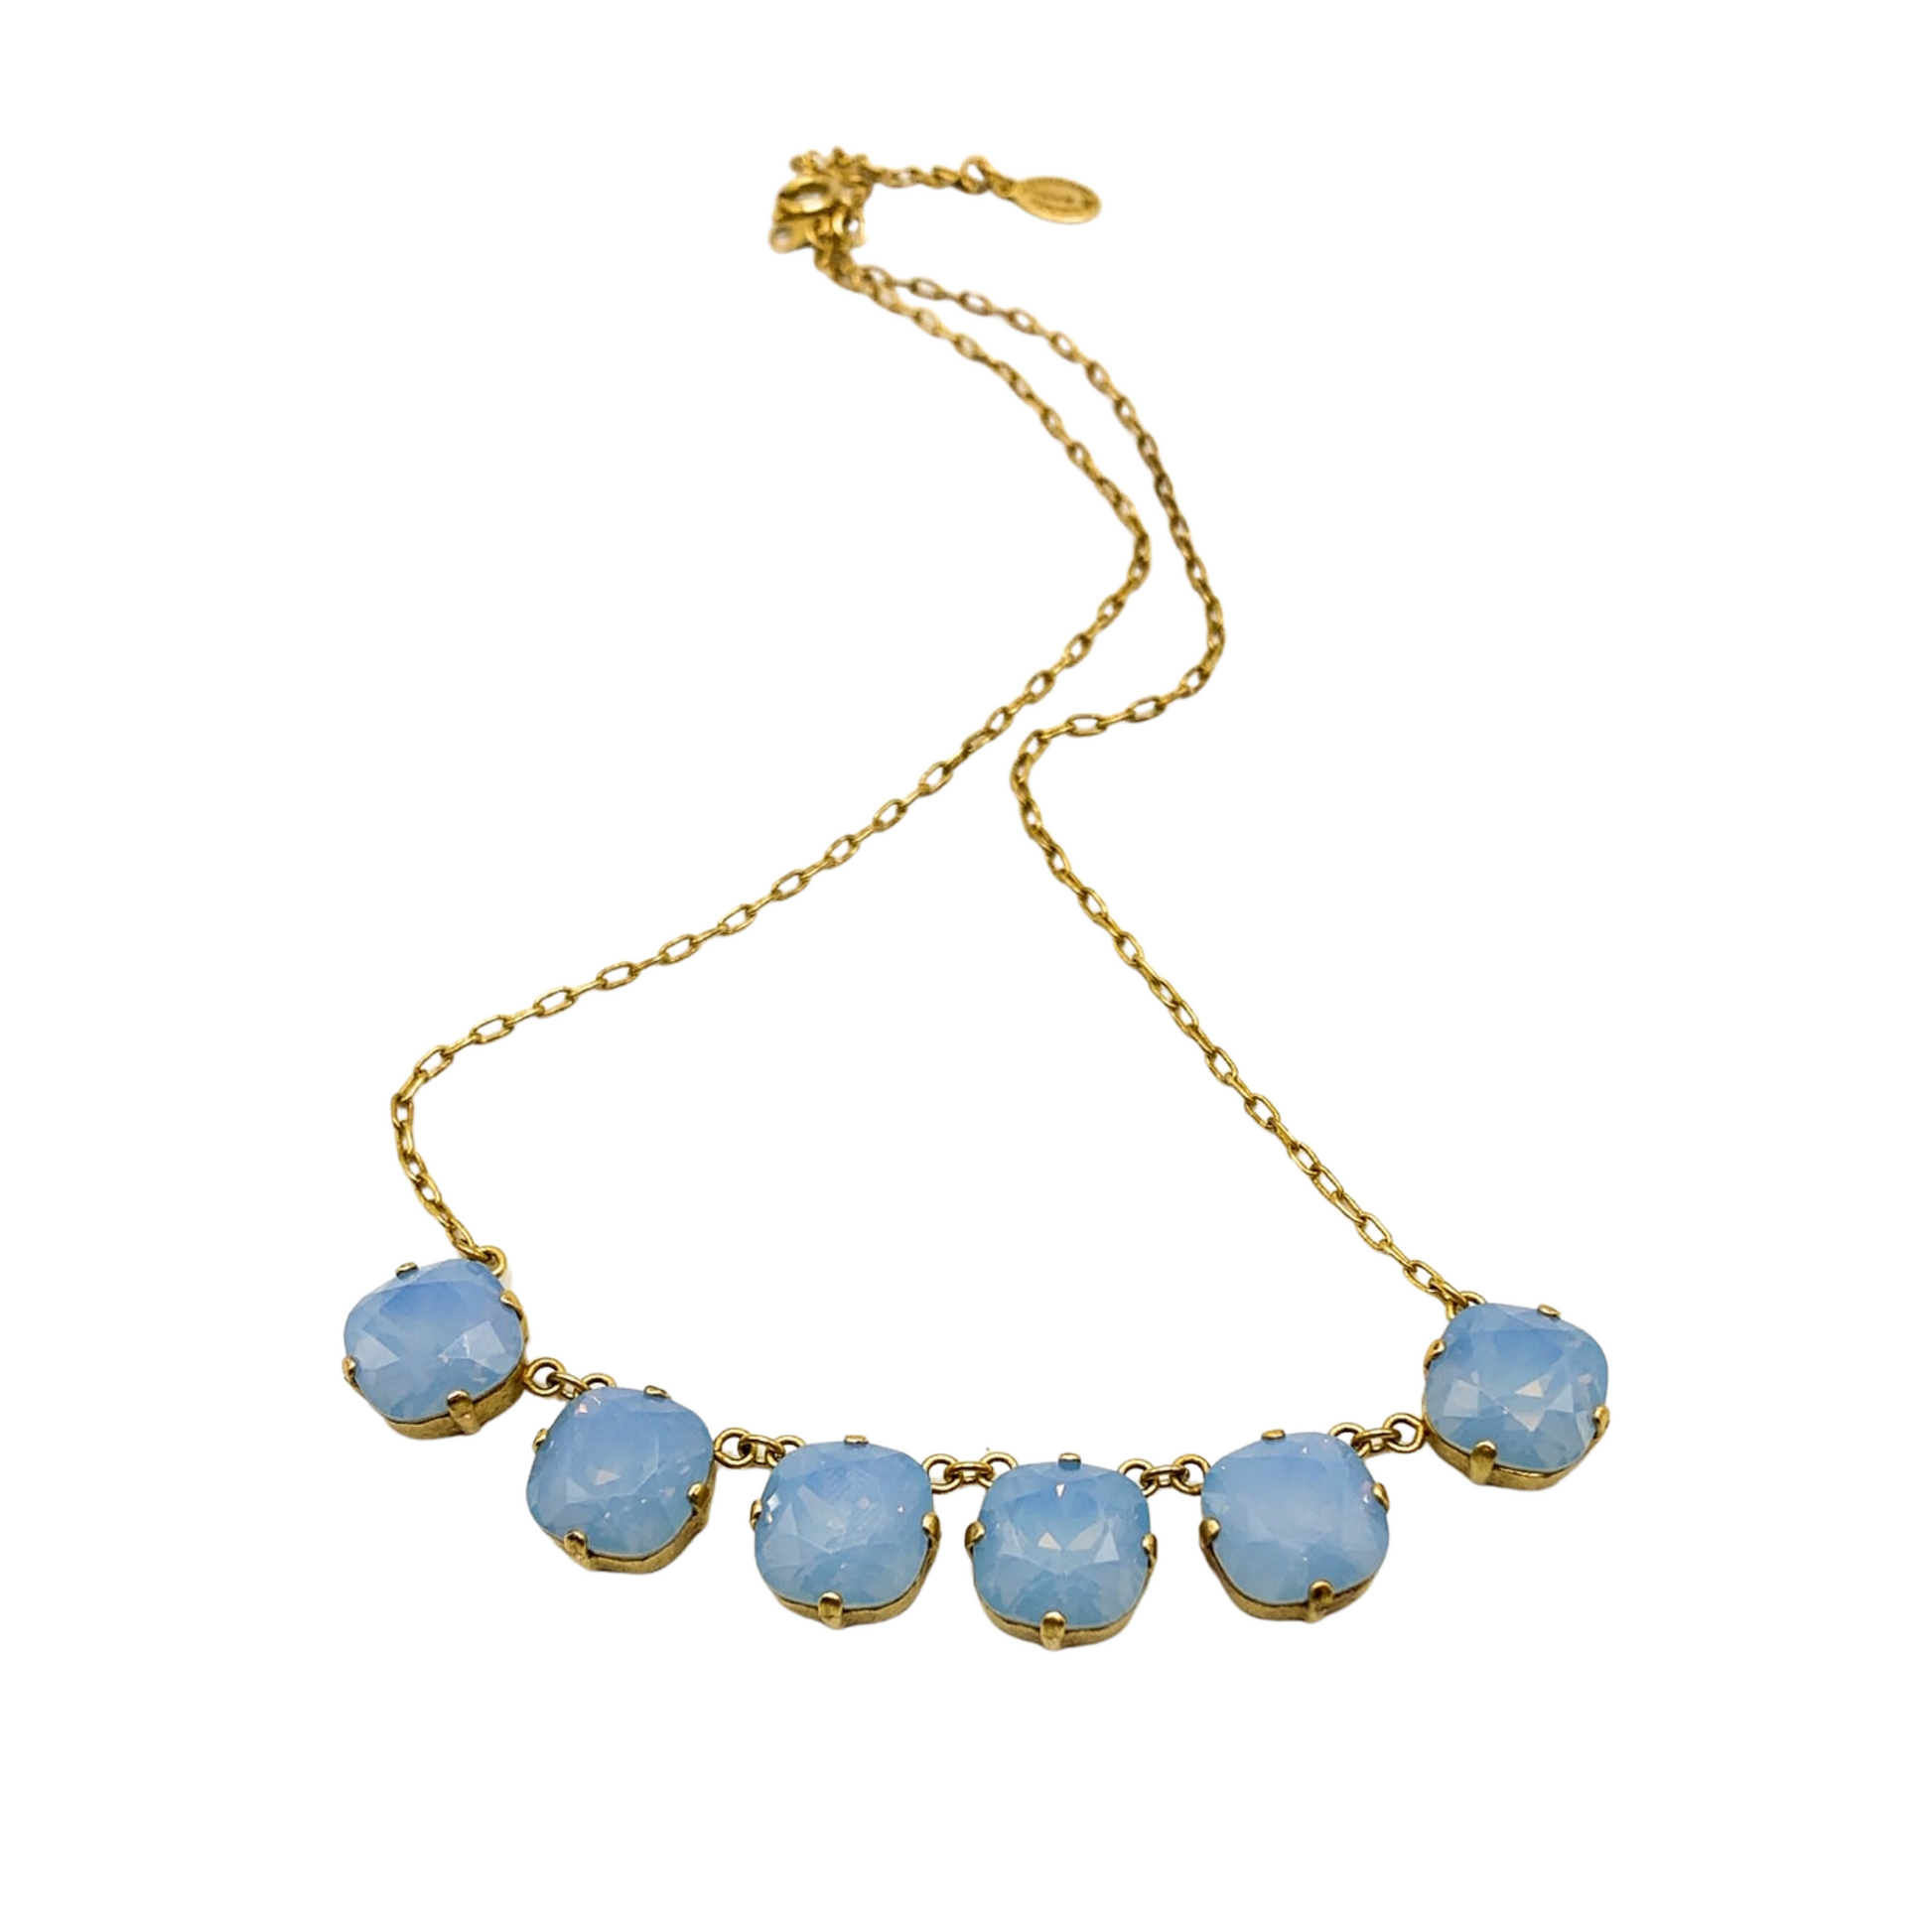 A top-down view of a necklace with a thin, clasped gold chain and six light blue, translucent crystals.